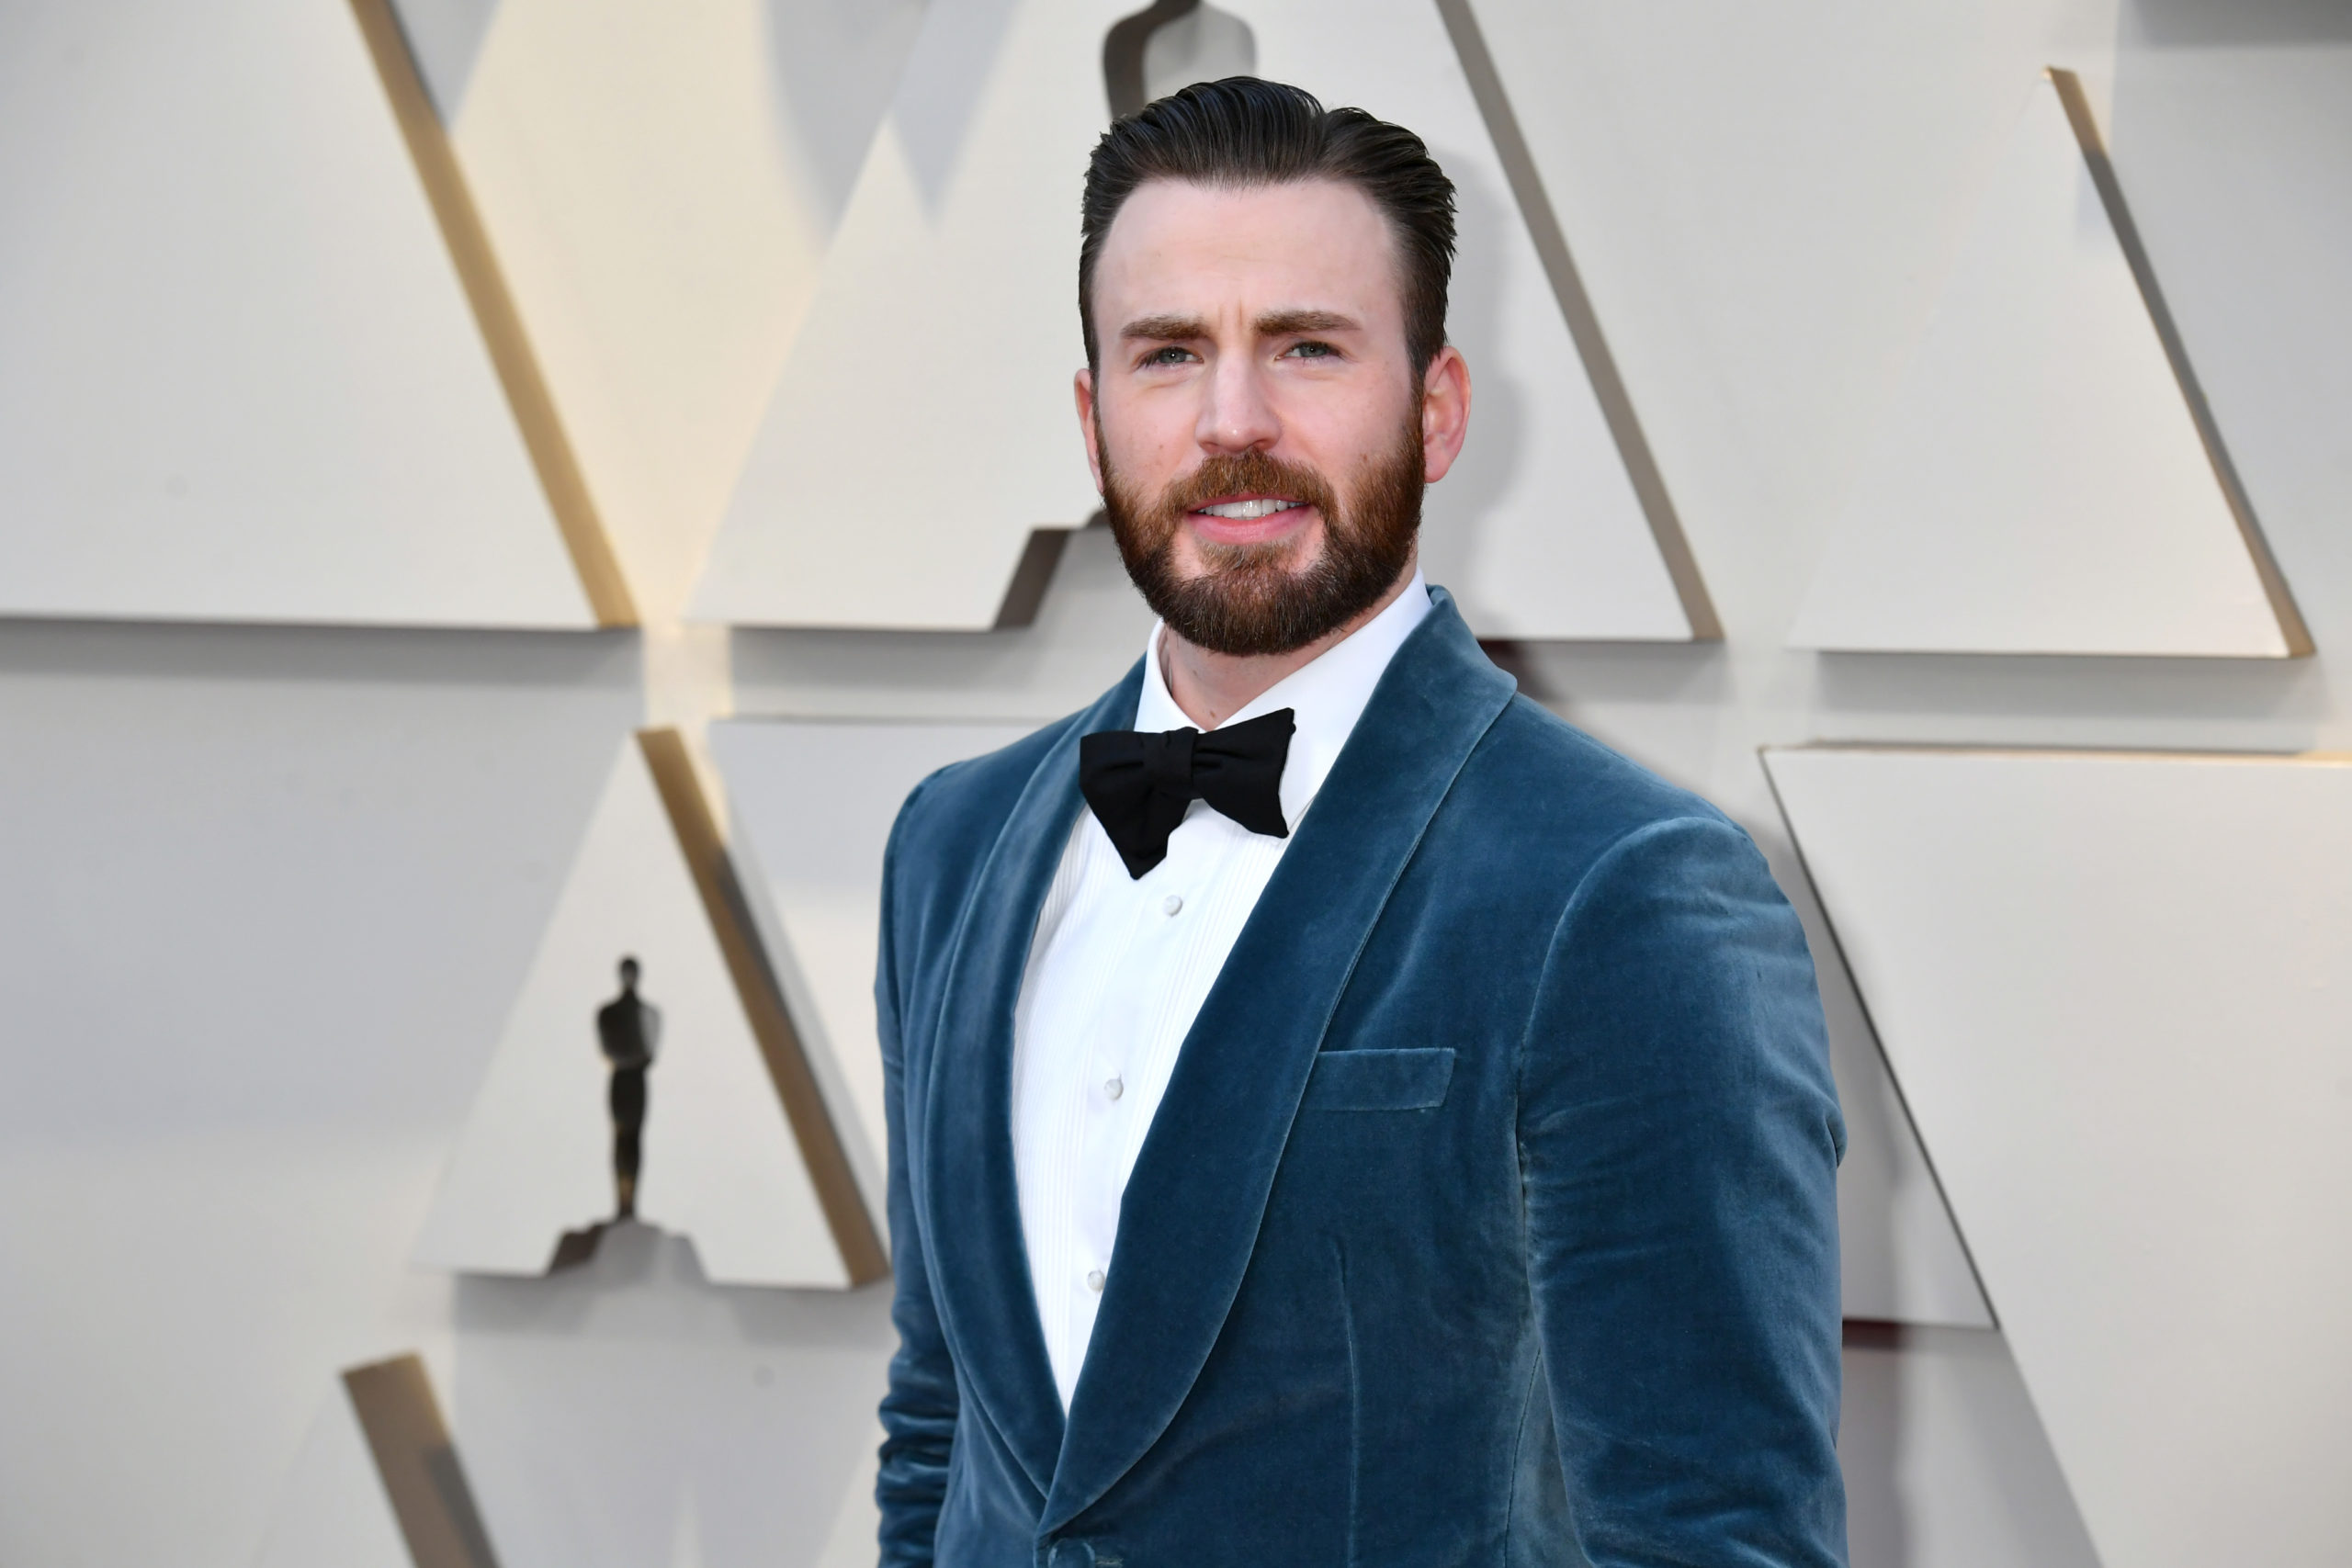 Chris Evans Responds To Leaked Nude Controversy With A PSA To Vote